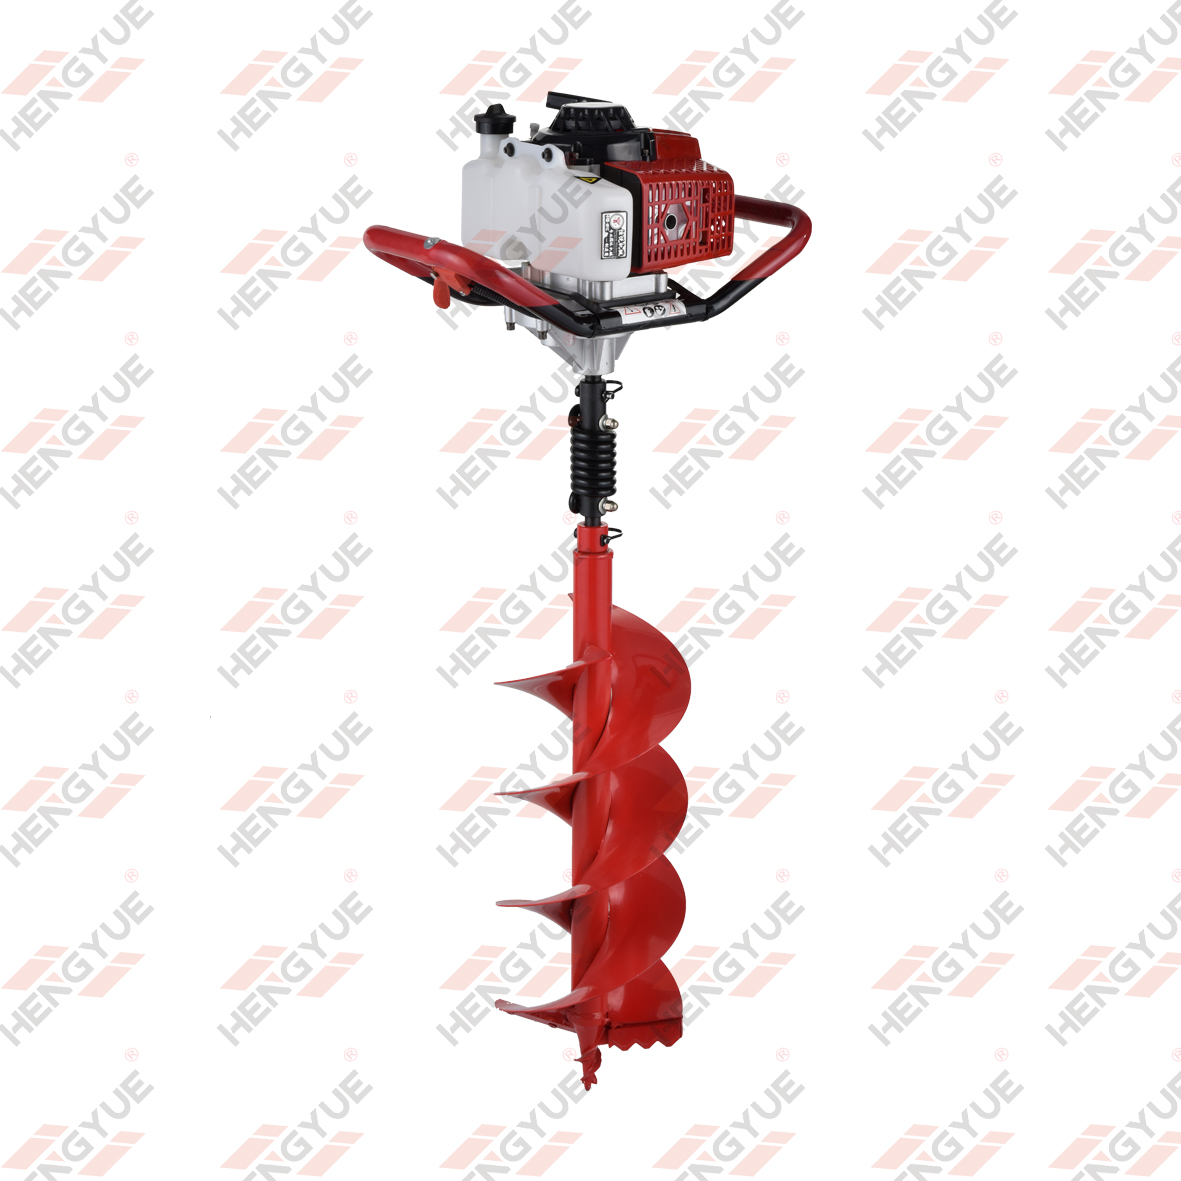 68cc Engine Power Earth Auger 